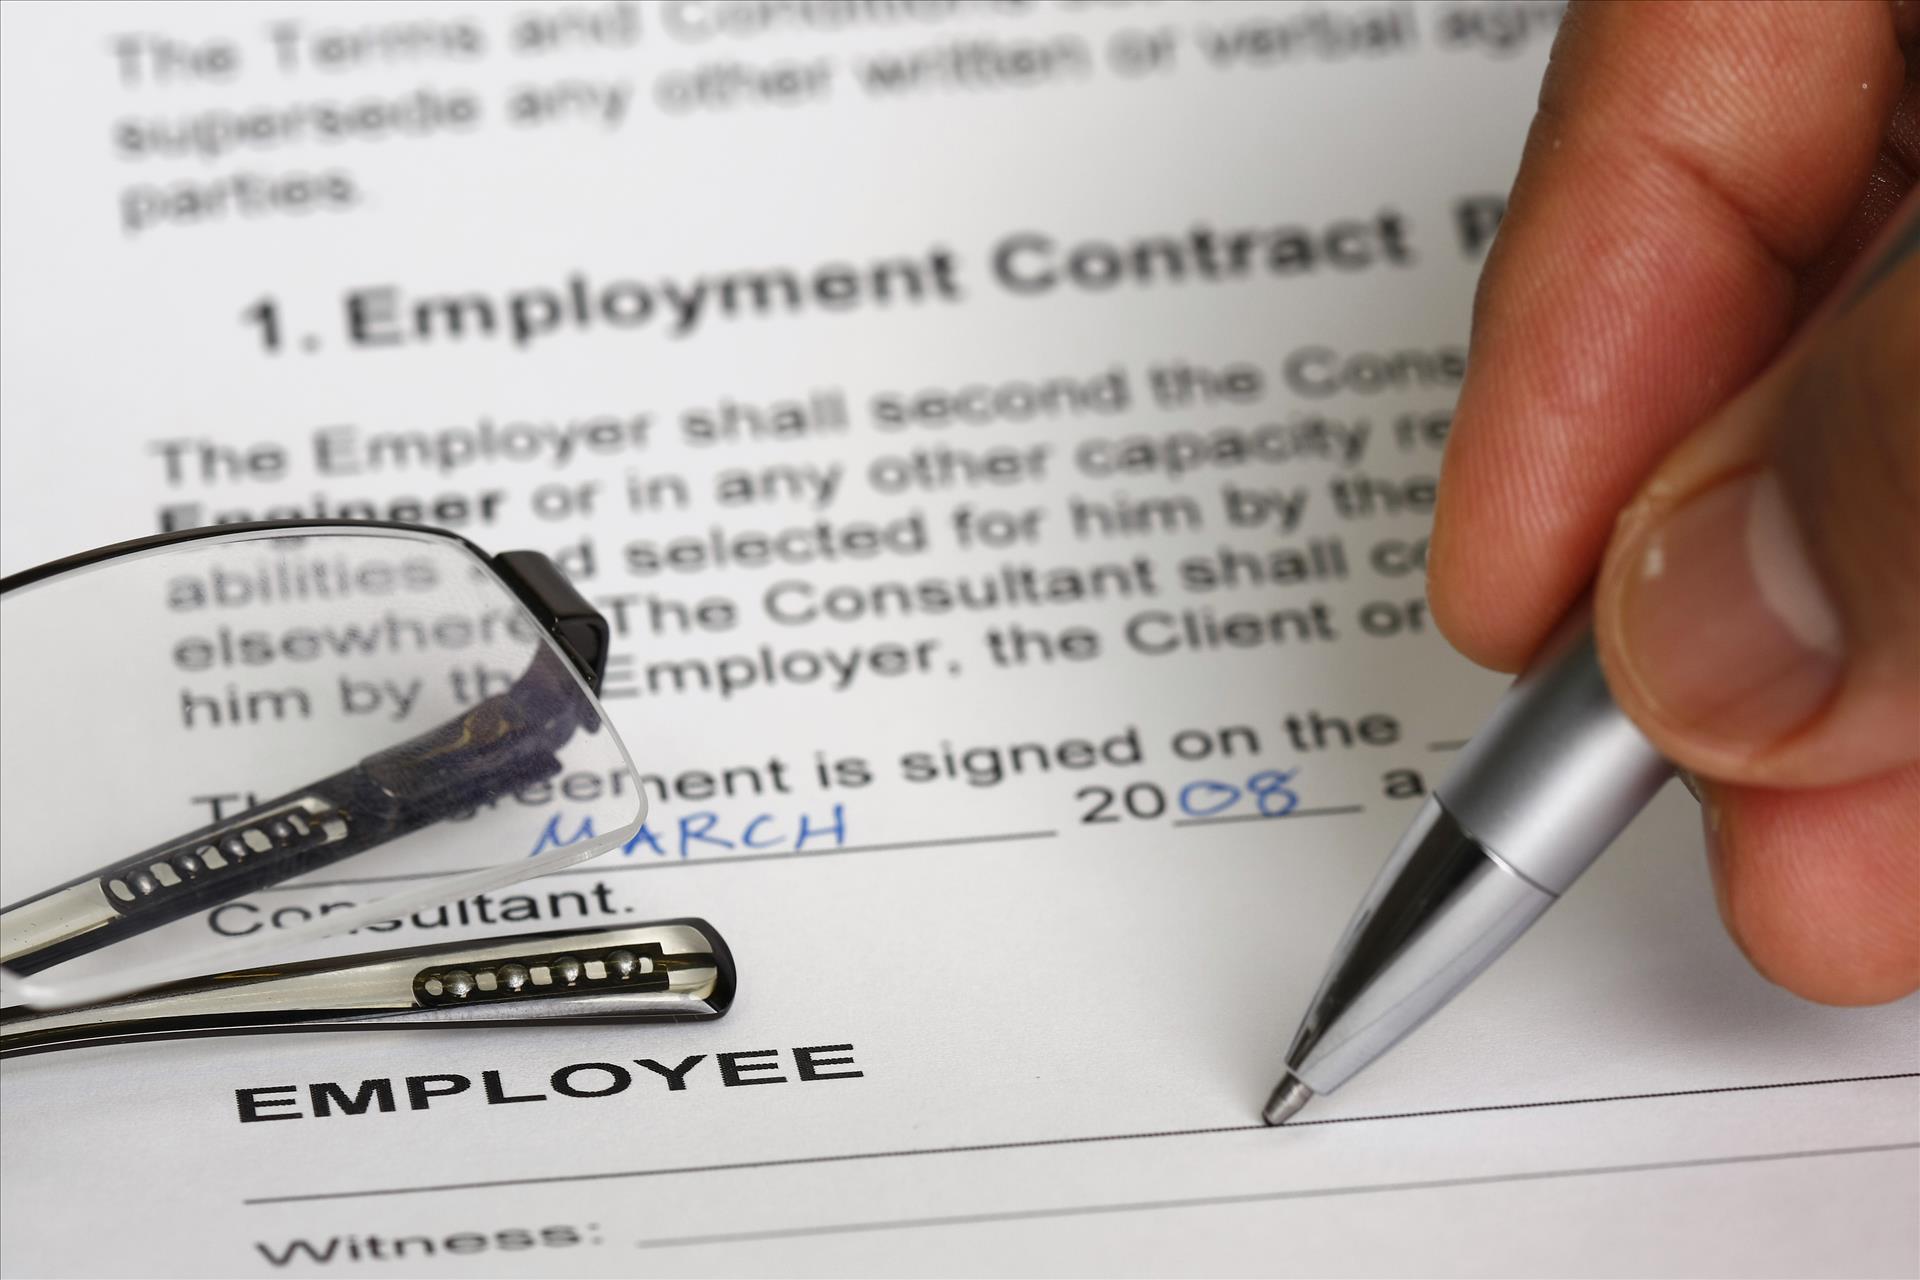 Employment Contracts for all workers